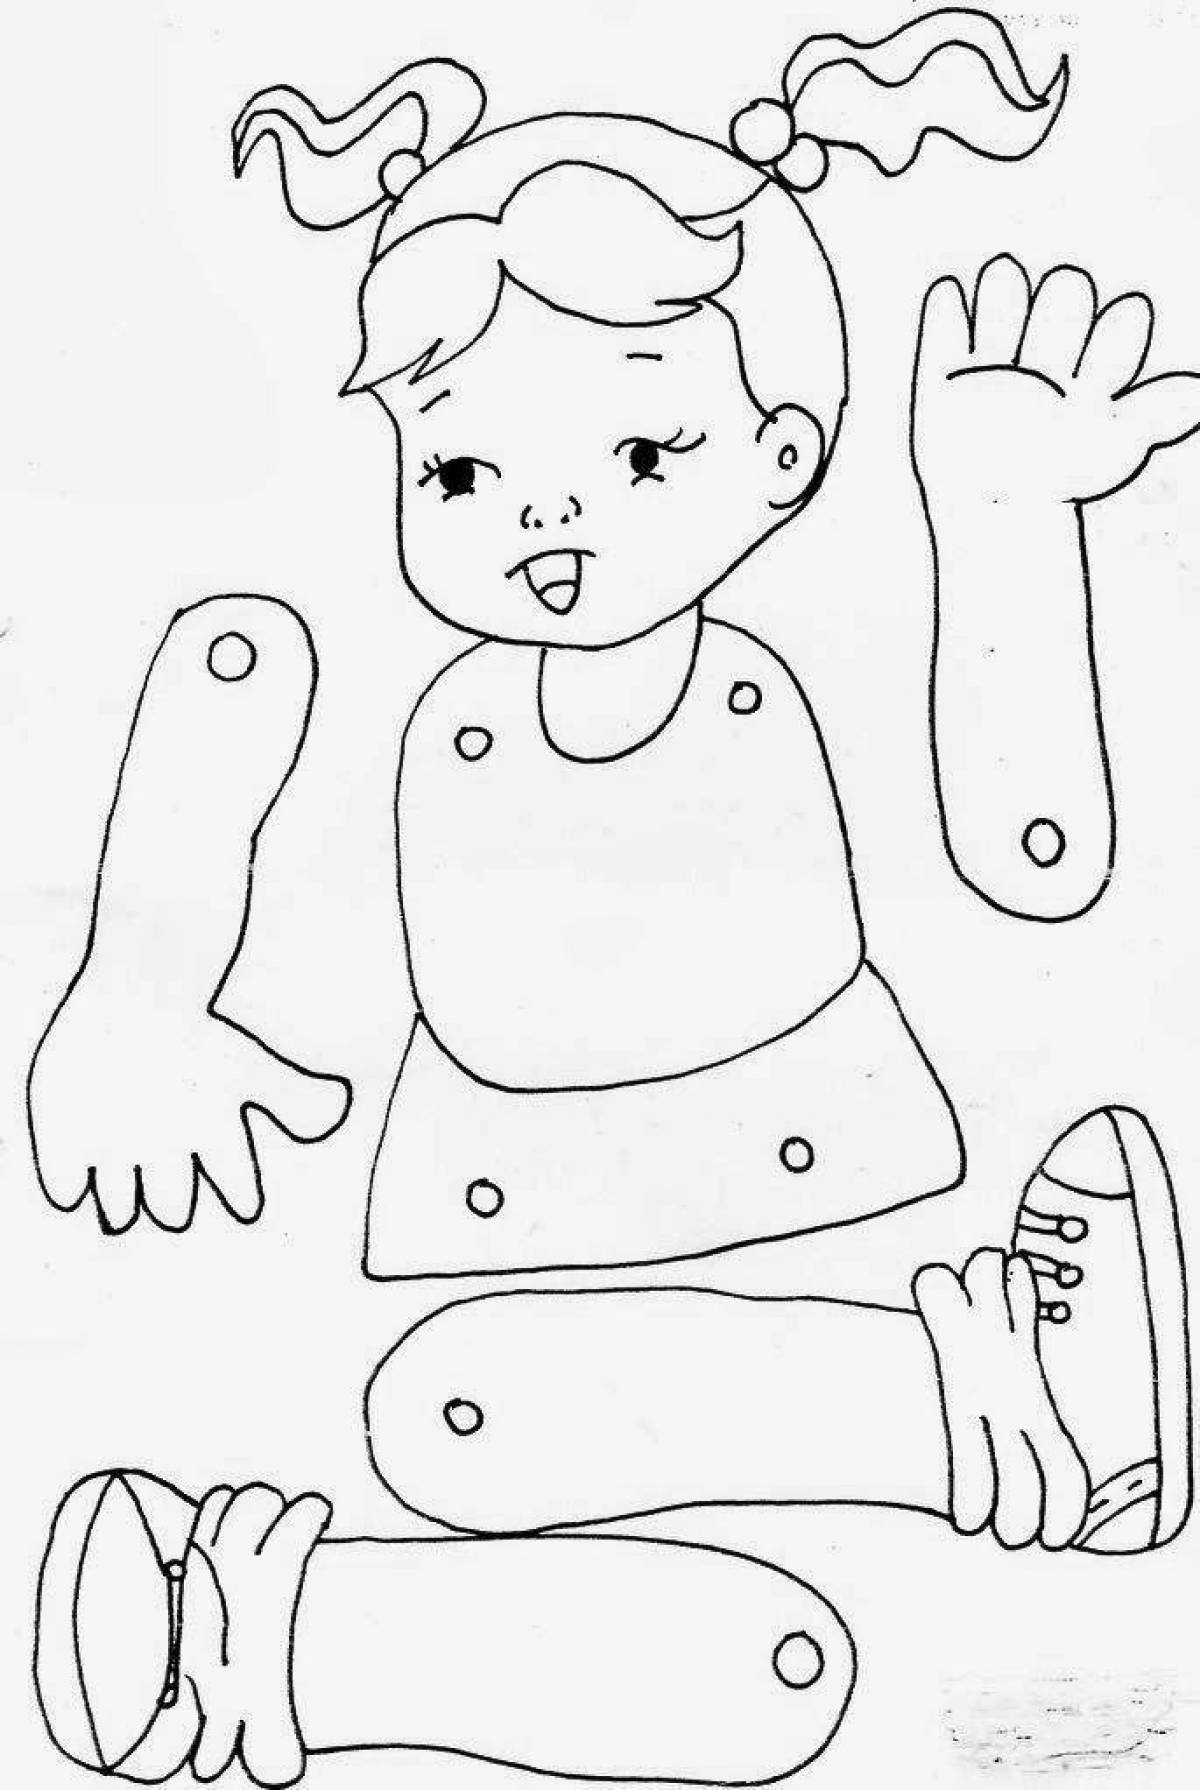 Colorful coloring pages of human body parts for kids